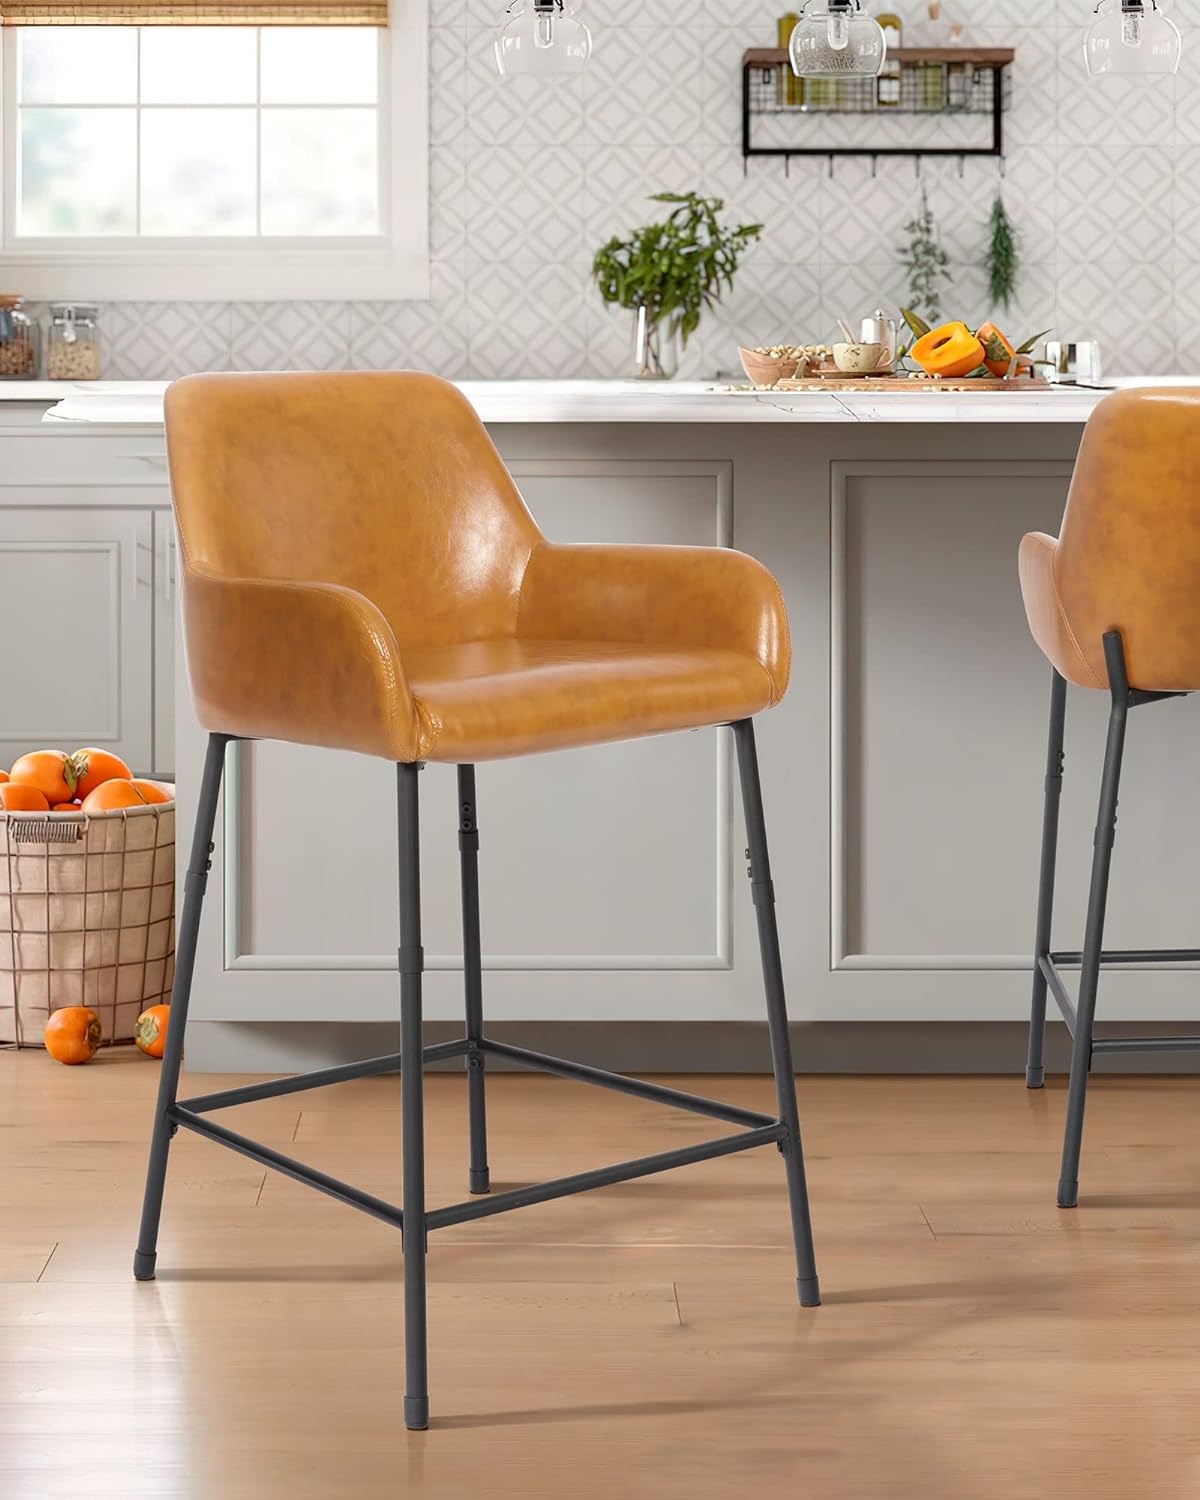 Elegant High-Back Counter Chairs （Set of 2）EXTRA 55%OFF AT CHECKOUT